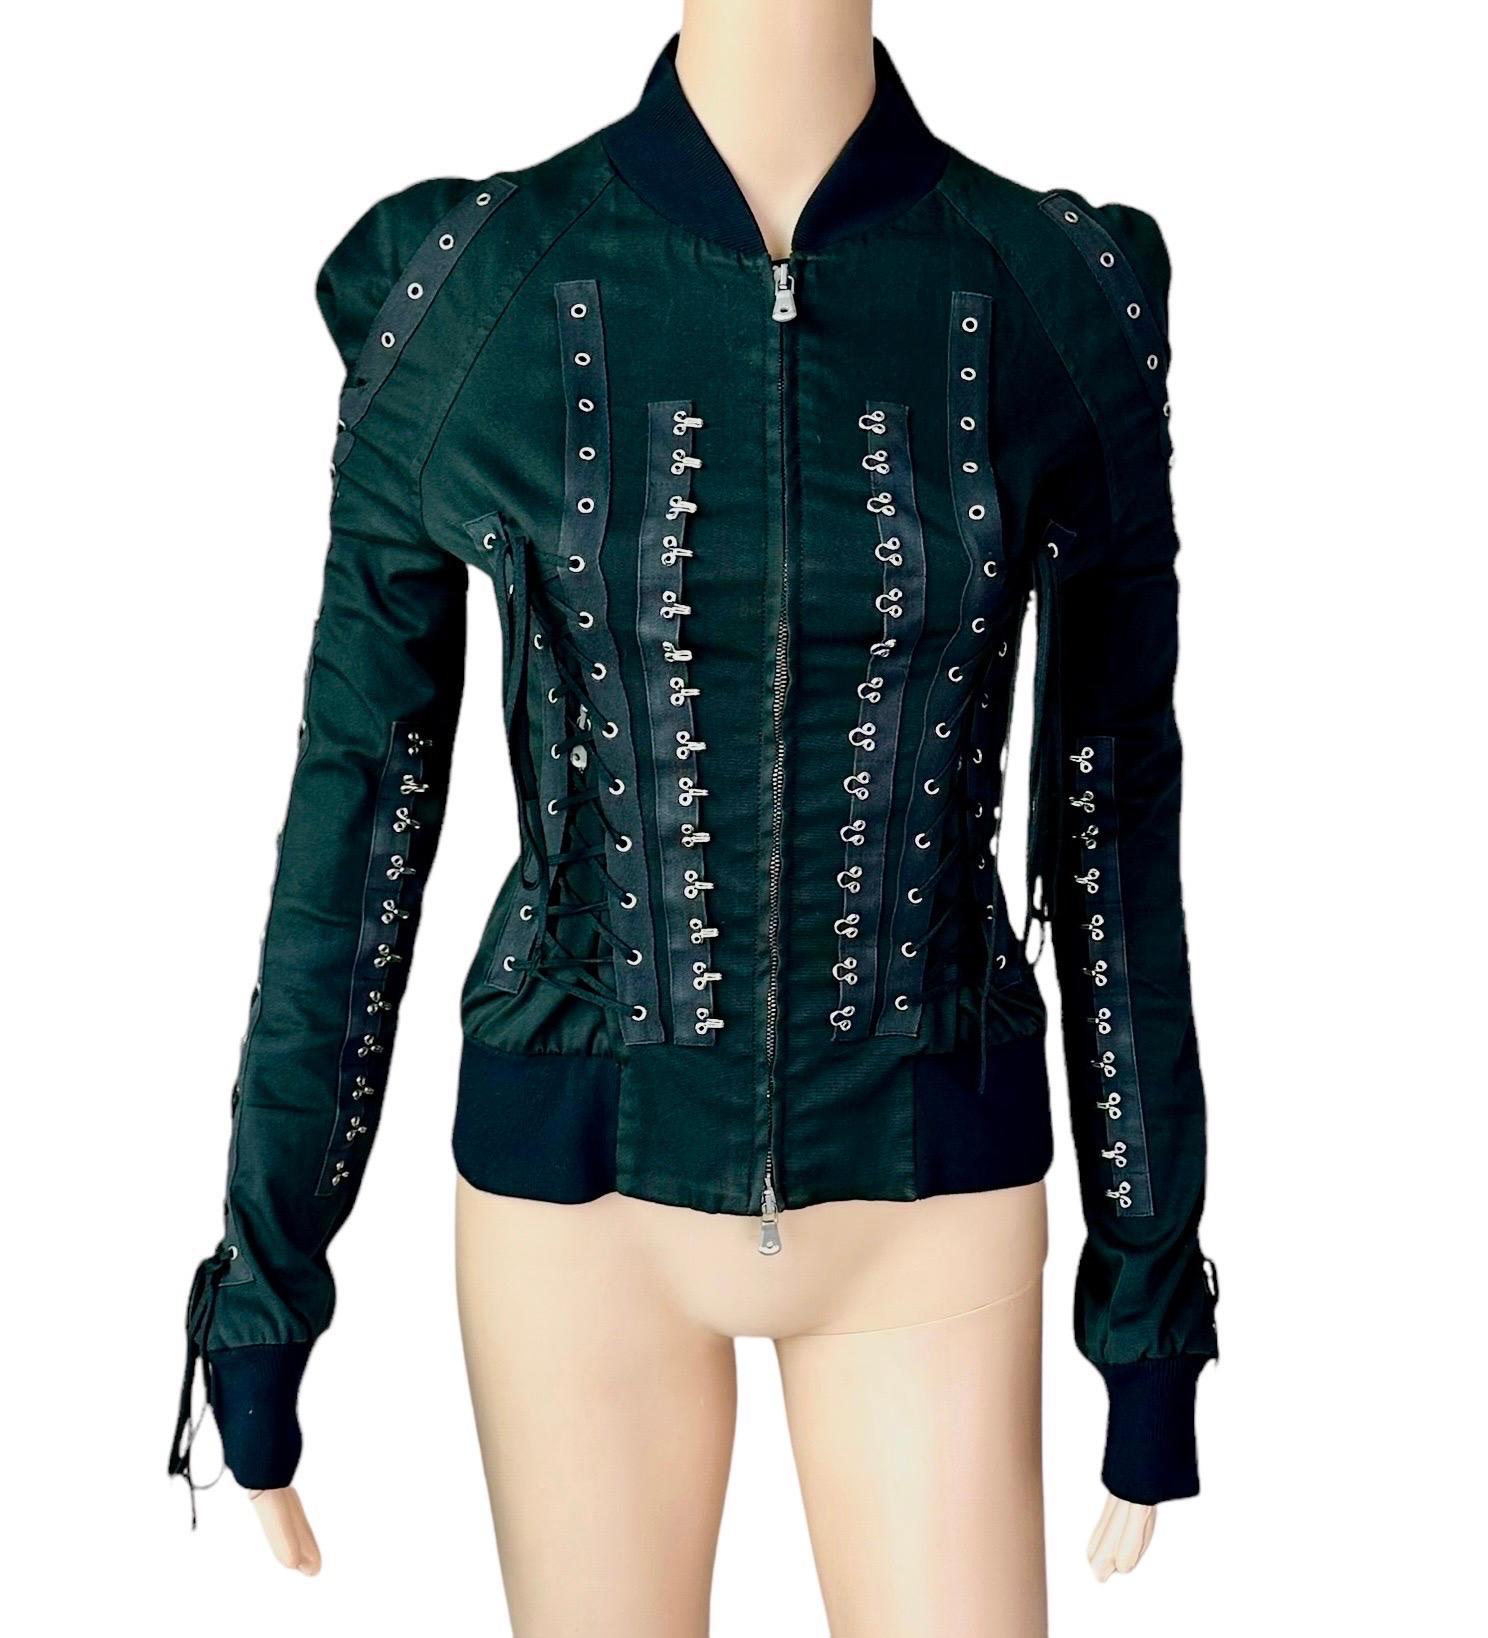 Dolce & Gabbana F/W 2003 Corset Lace Up Hook and Eye Black Top Jacket IT 42

Condition: Good Vintage Condition. Please note one eyelet is missing on the shoulder (please see last photo).

PLEASE FOLLOW US ON INSTAGRAM @OPULENTADDICT